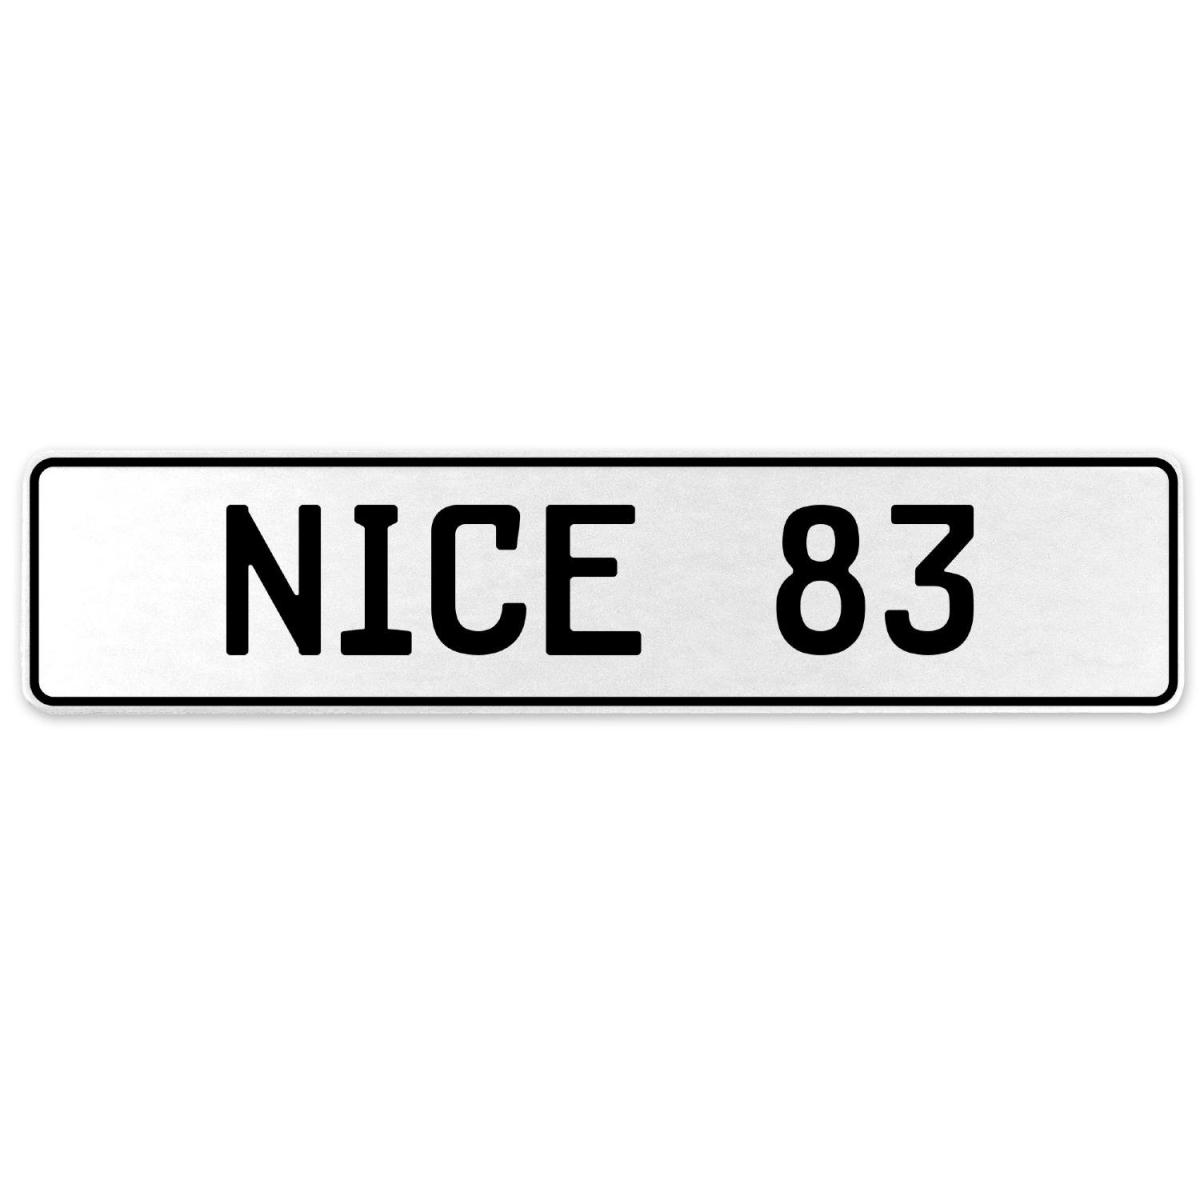 Nice 83 - White Aluminum Street Sign Mancave Euro Plate Name Door Sign Wall